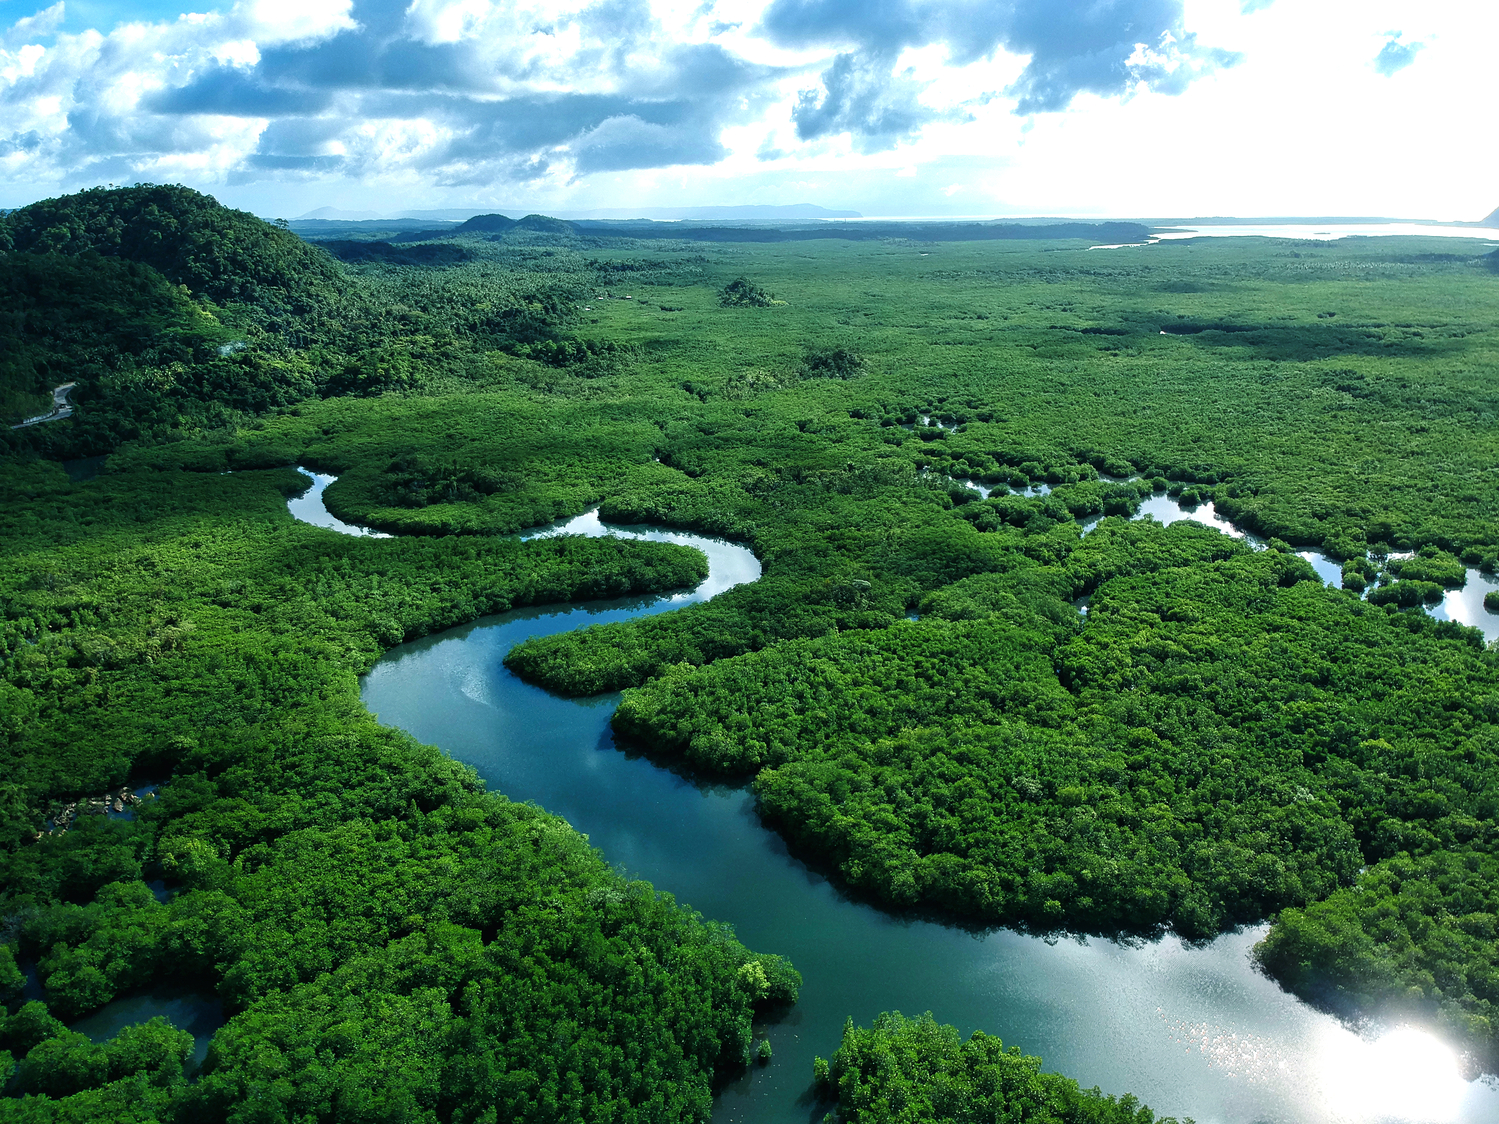 Mangroves in San Benito, Siargao Islands, Philippines.